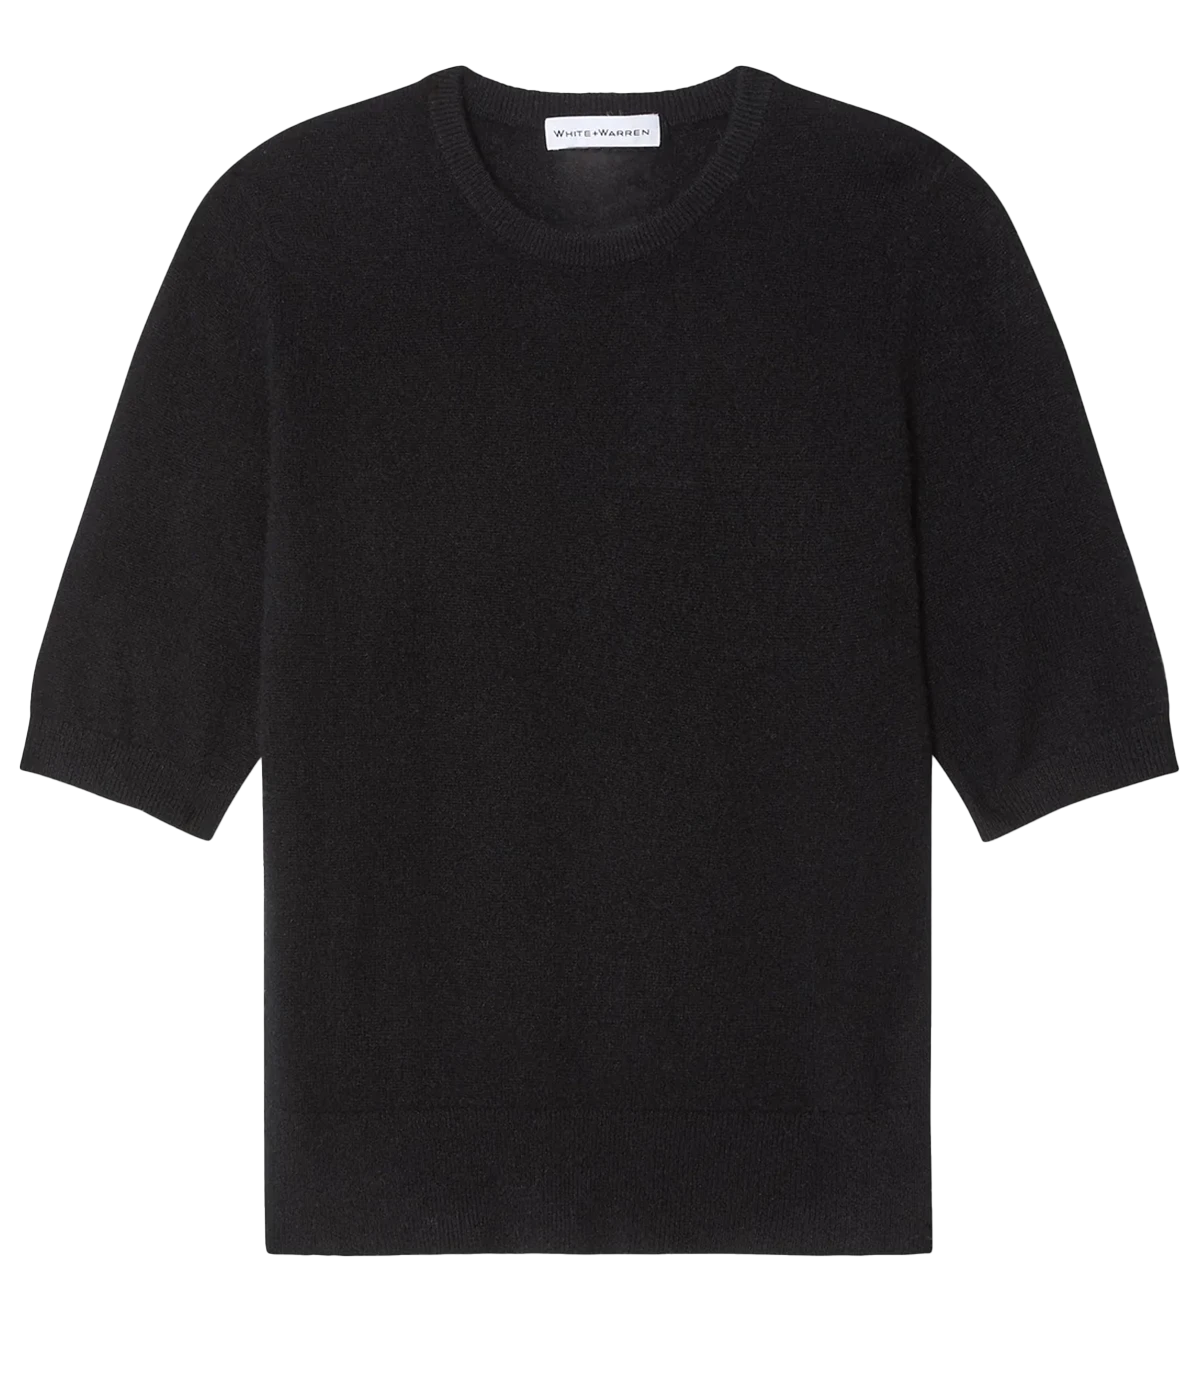 Cashmere Elbow Sleeve Tee in Black